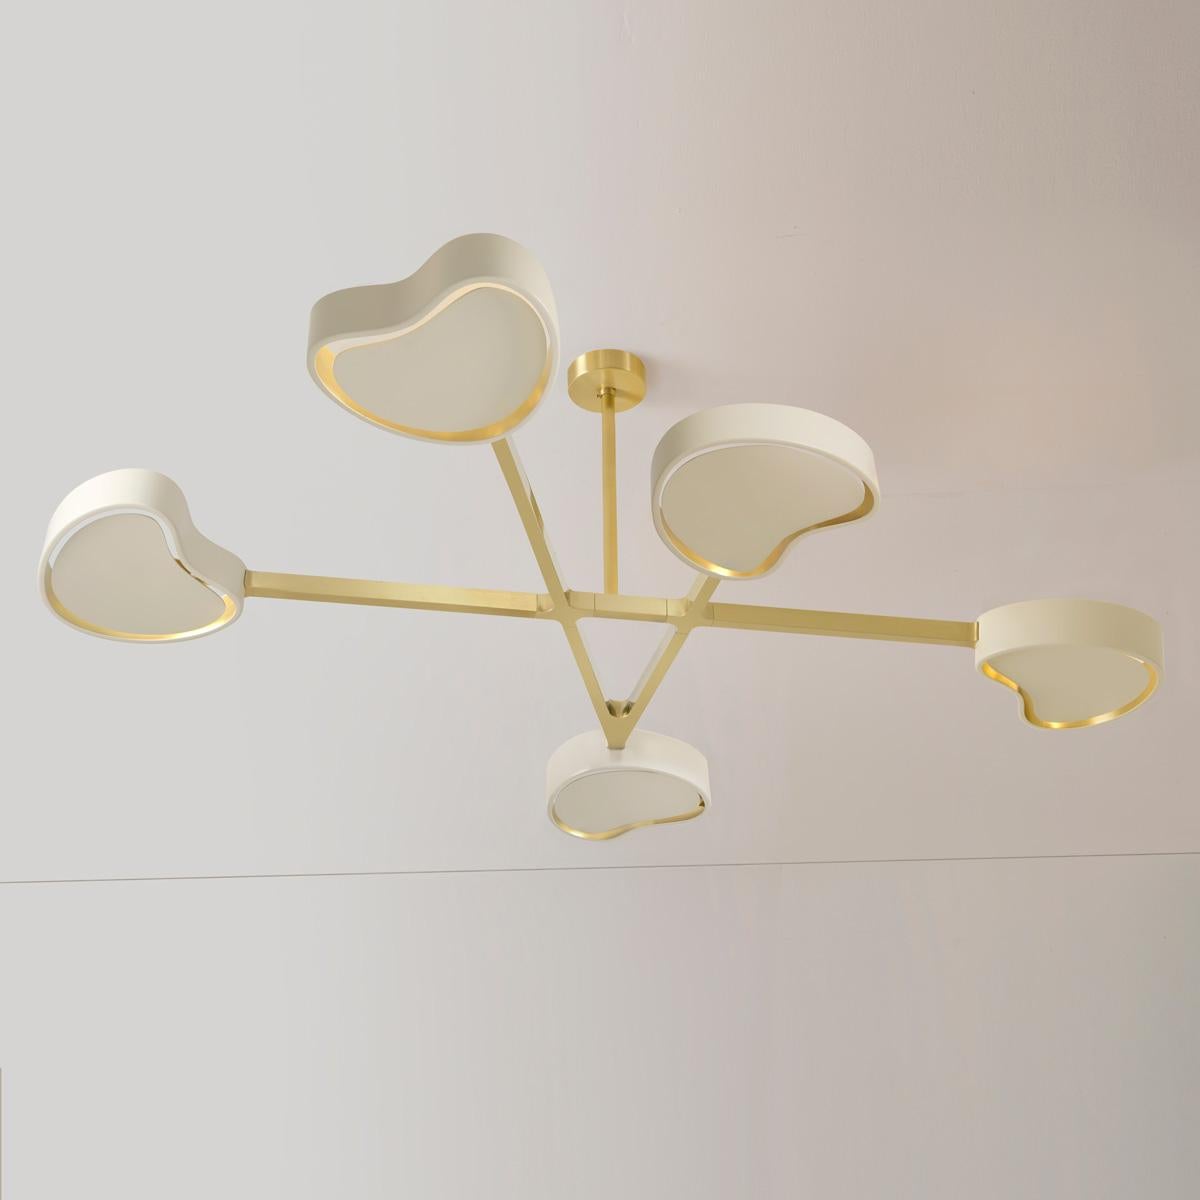 Modern Cuore N.5 Ceiling Light by Gaspare Asaro. Satin Brass and Sand White Finish For Sale